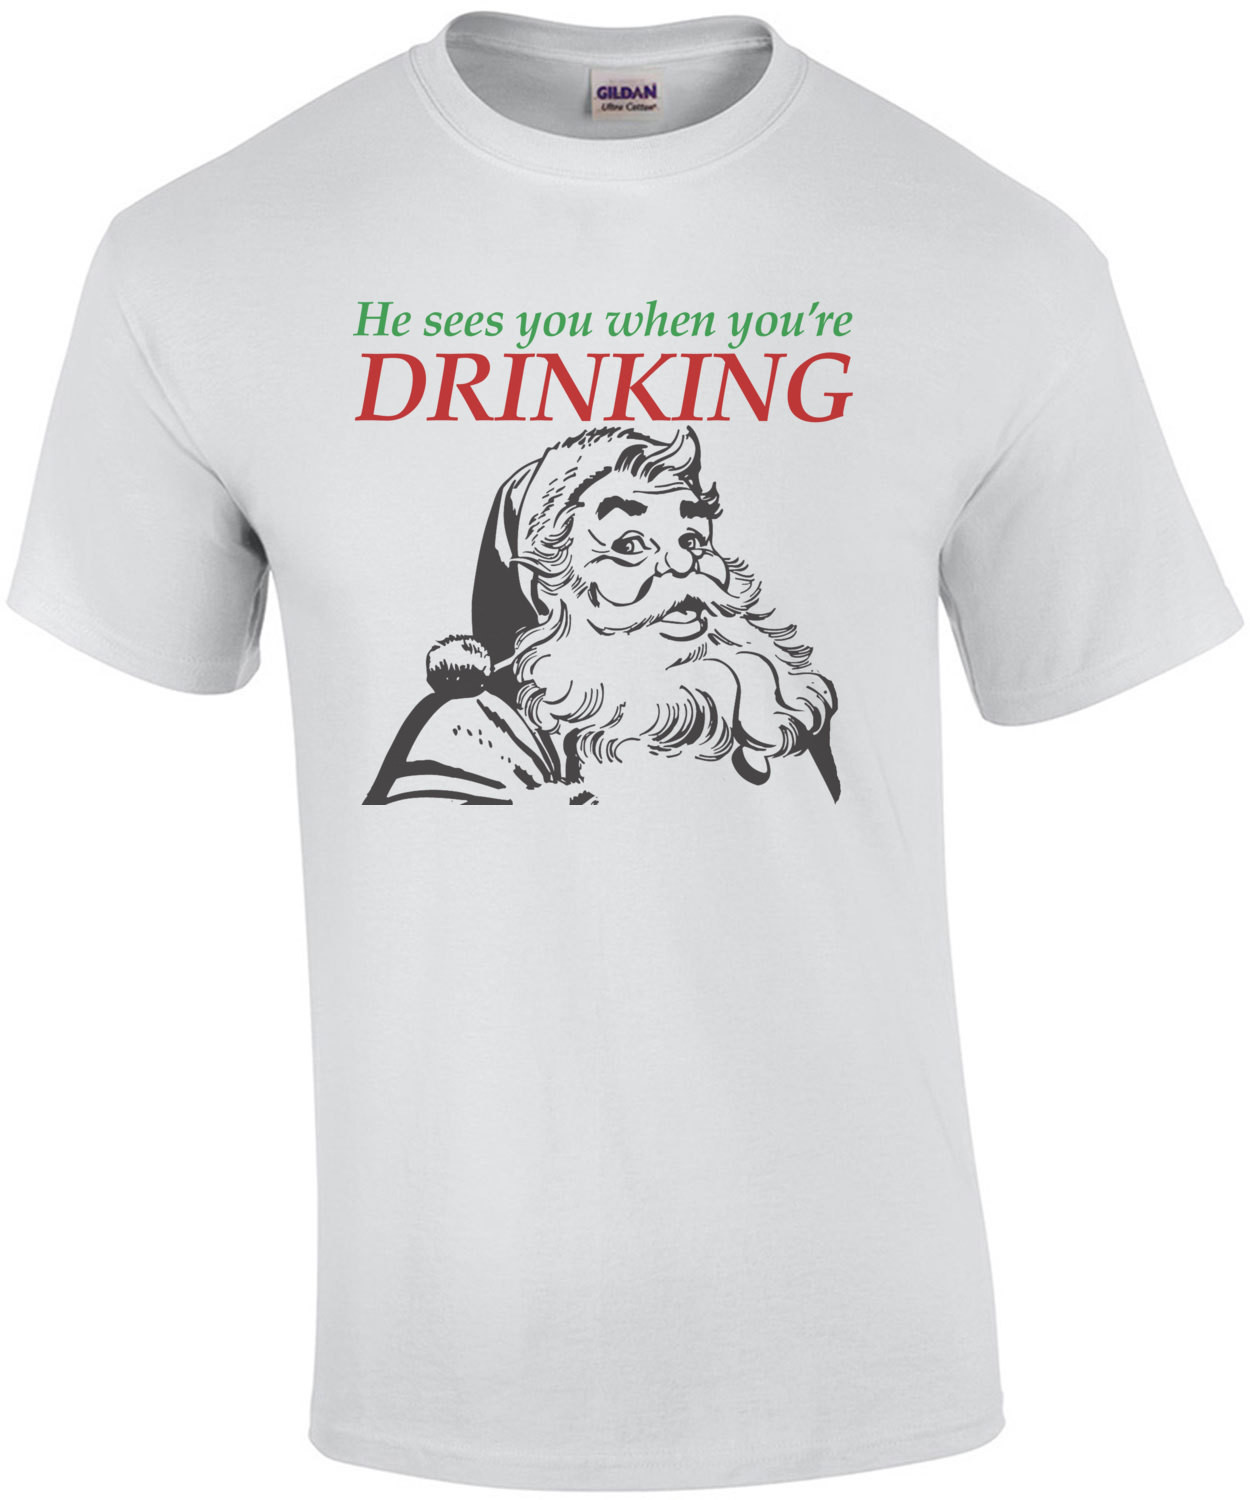 He sees you when you're drinking. Funny Santa Christmas T-Shirt